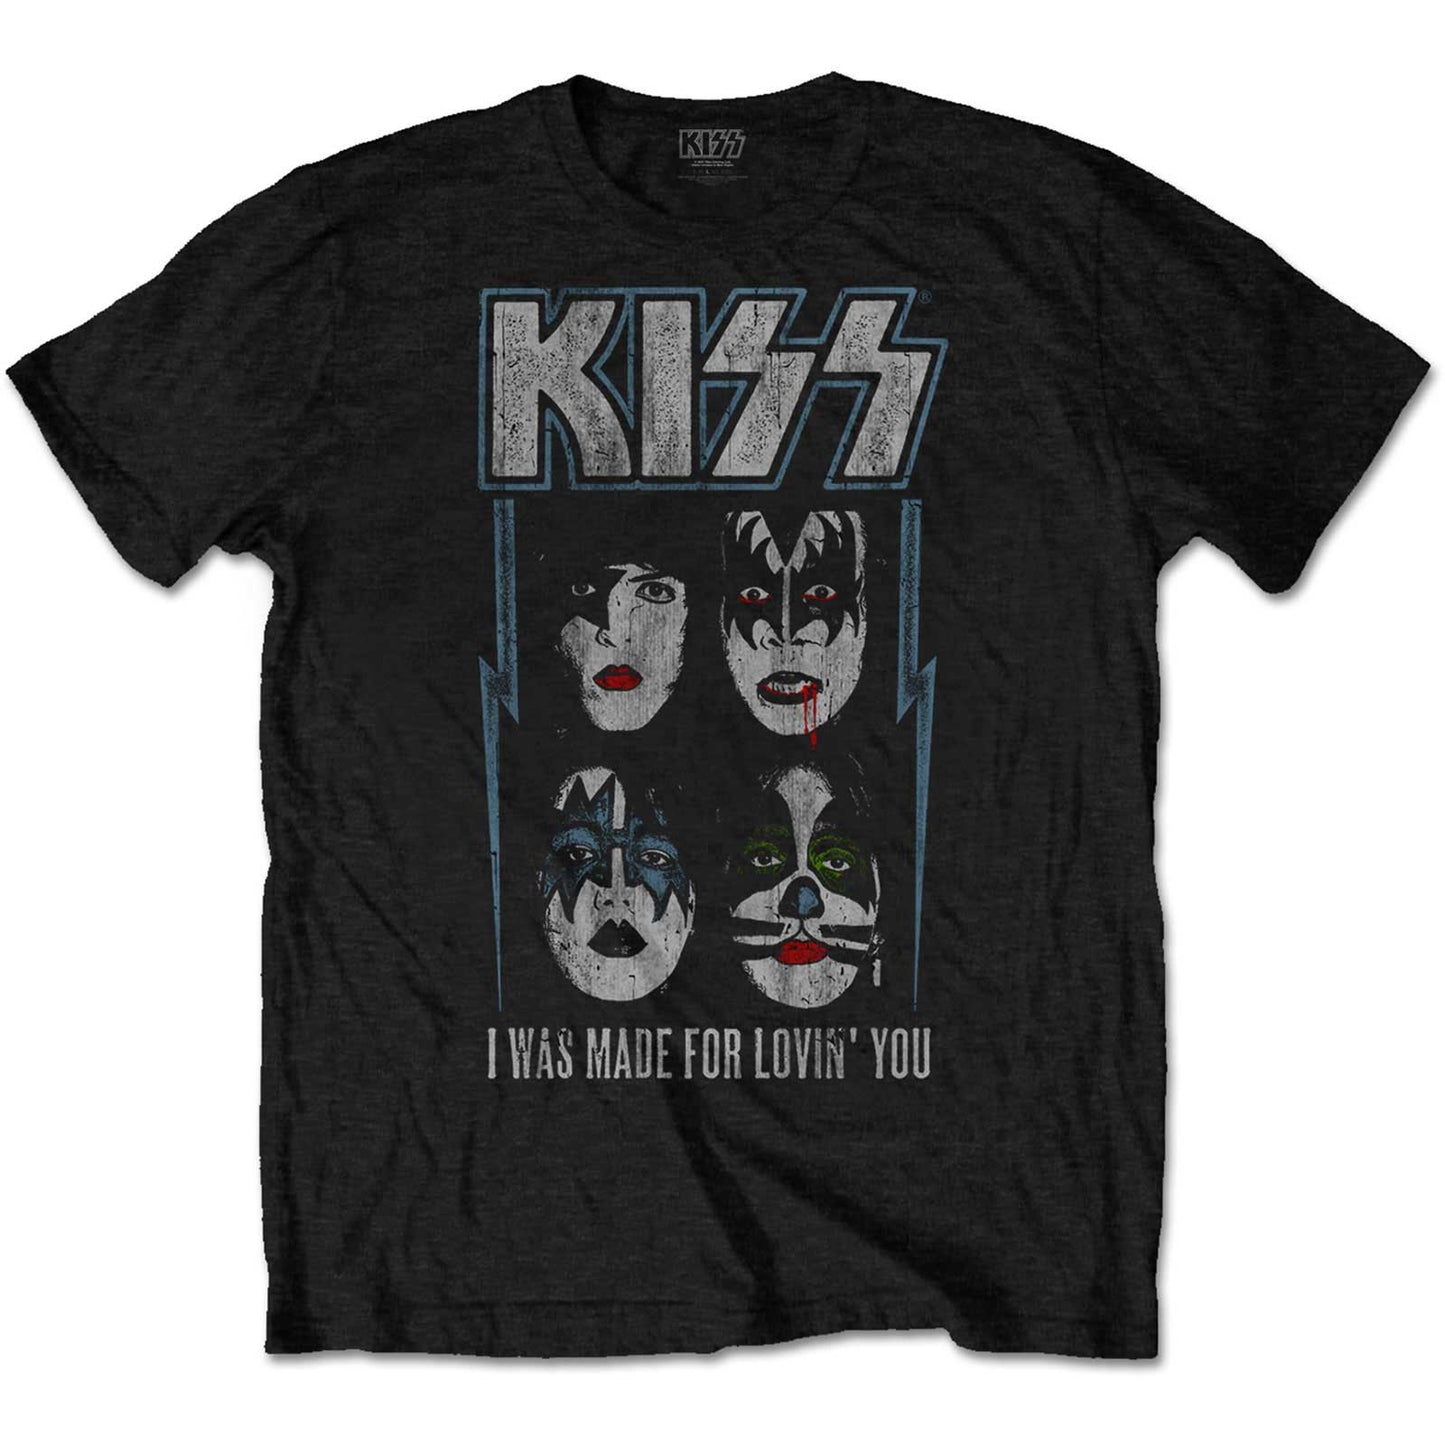 KISS T-Shirt: Made For Lovin' You